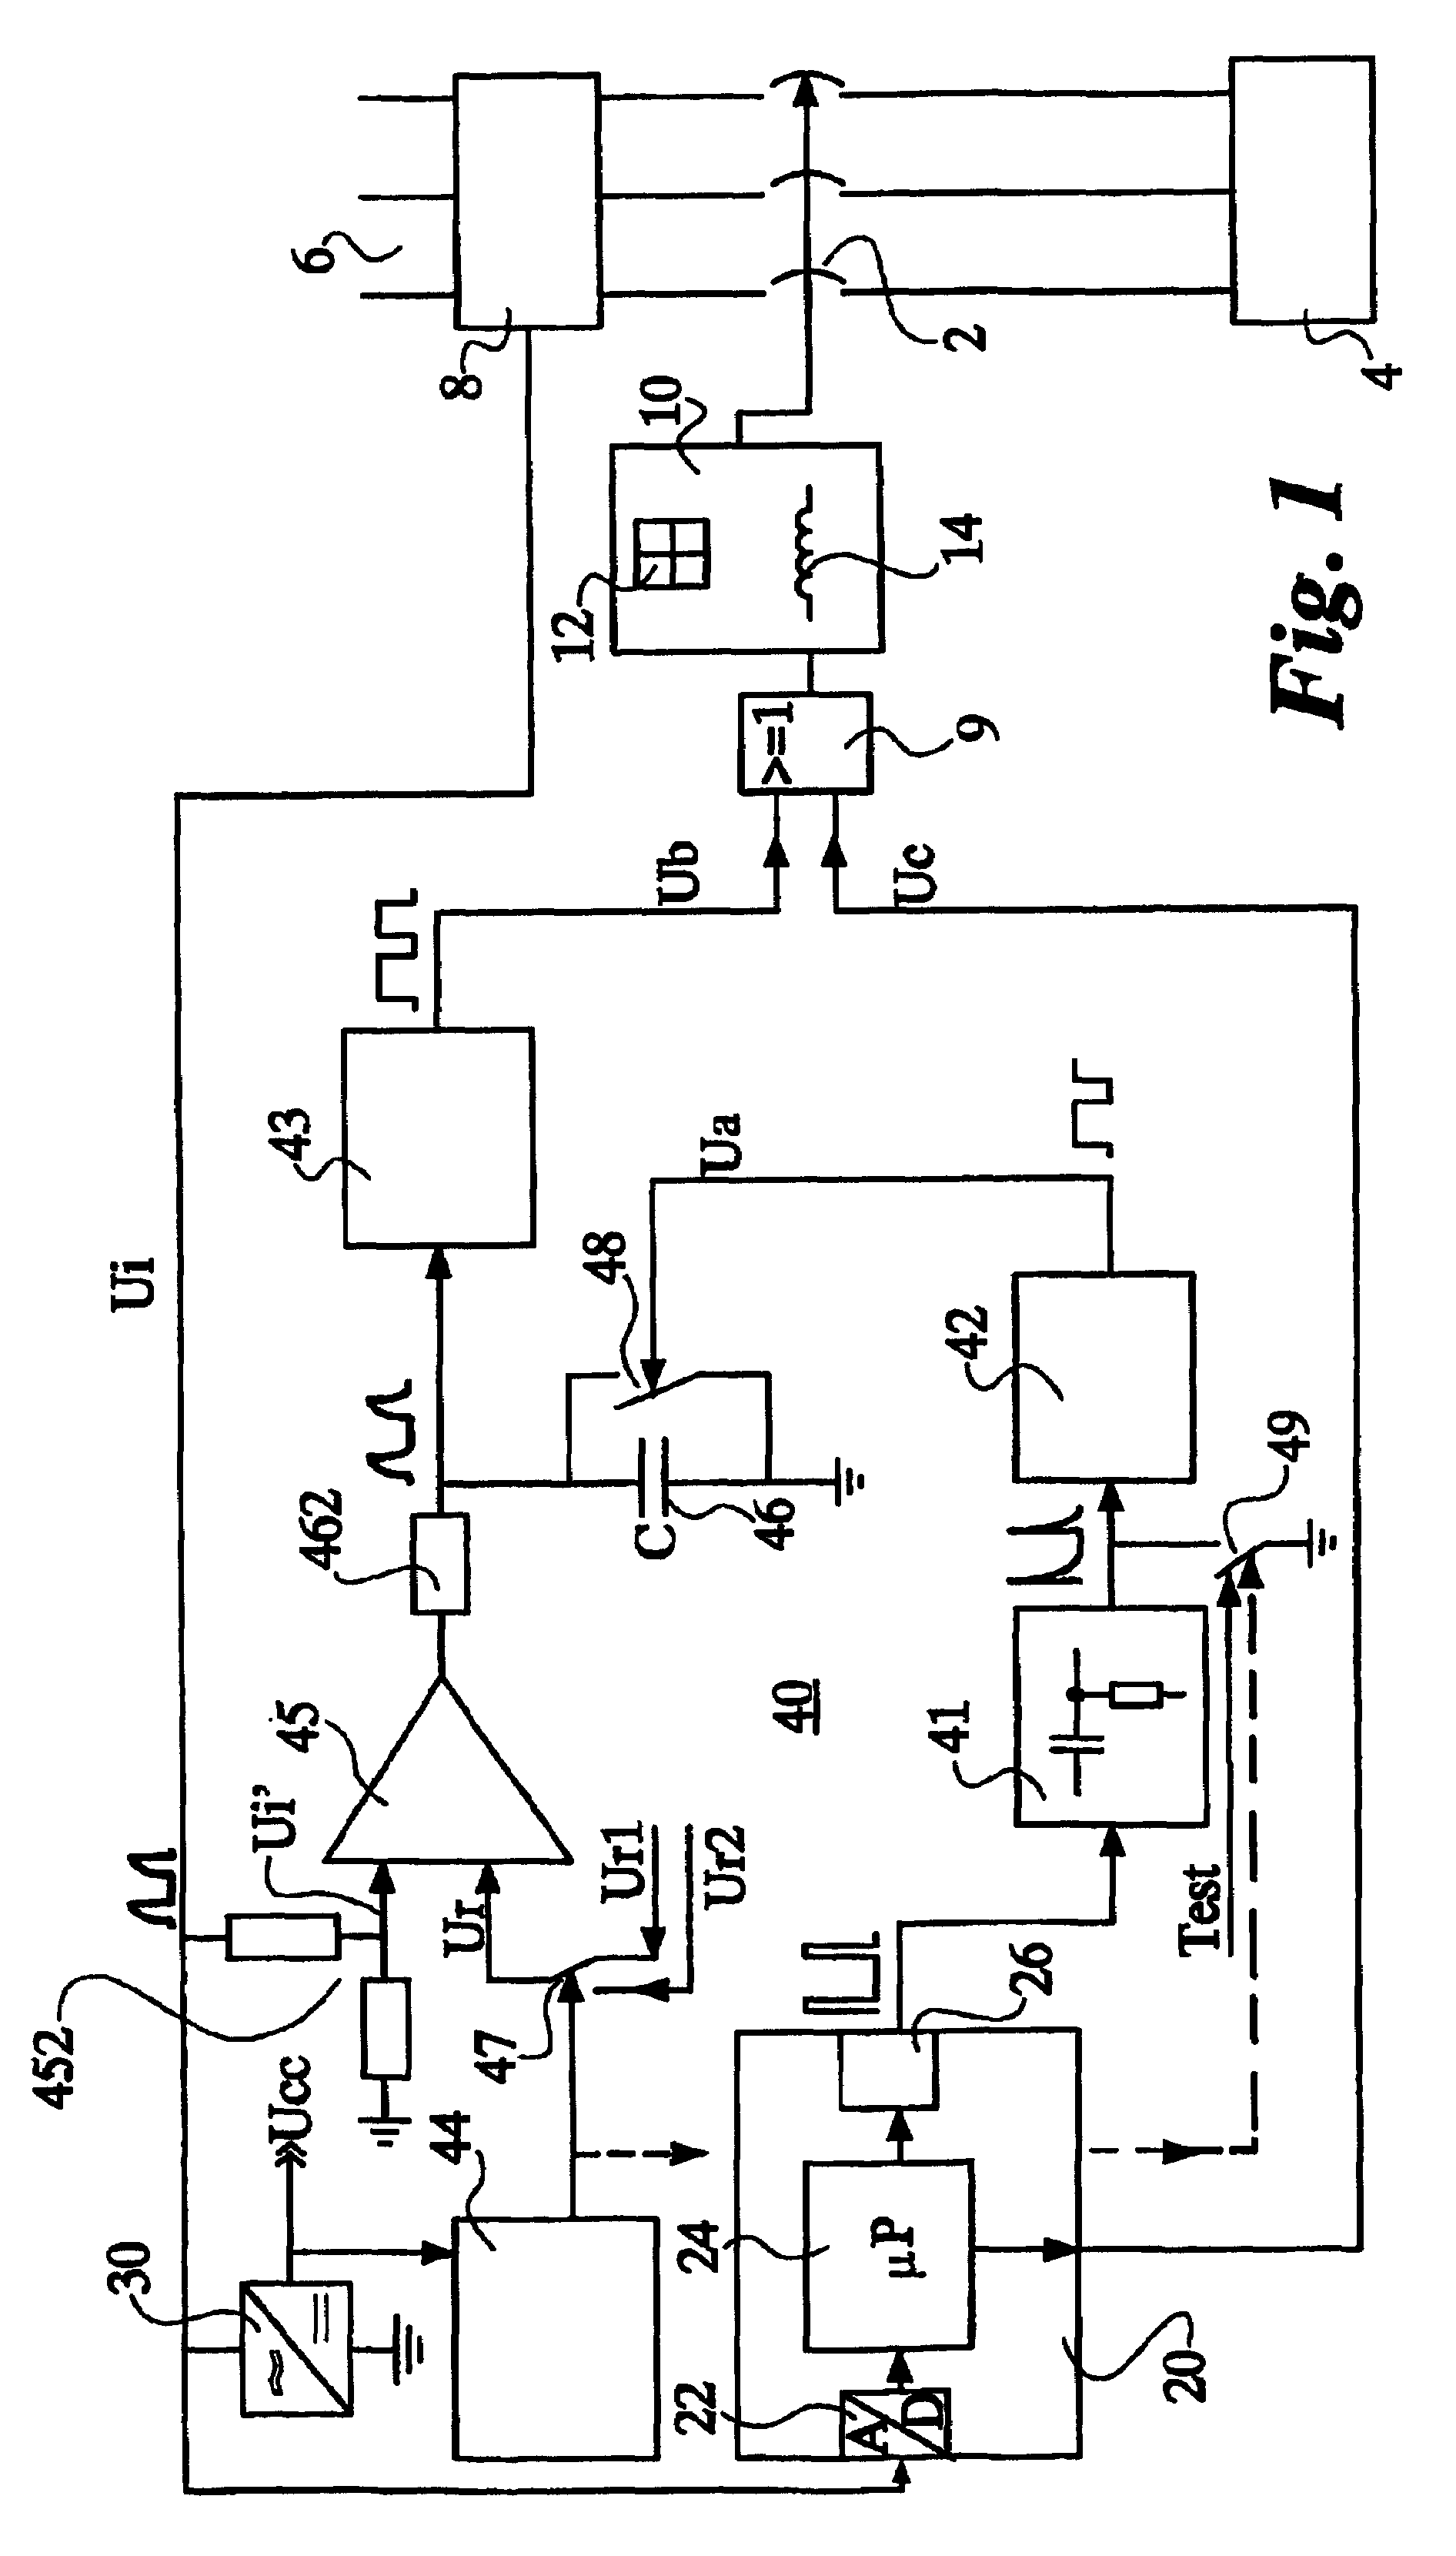 Circuit breaker having a microprocessor-controlled tripping device and a bypass circuit